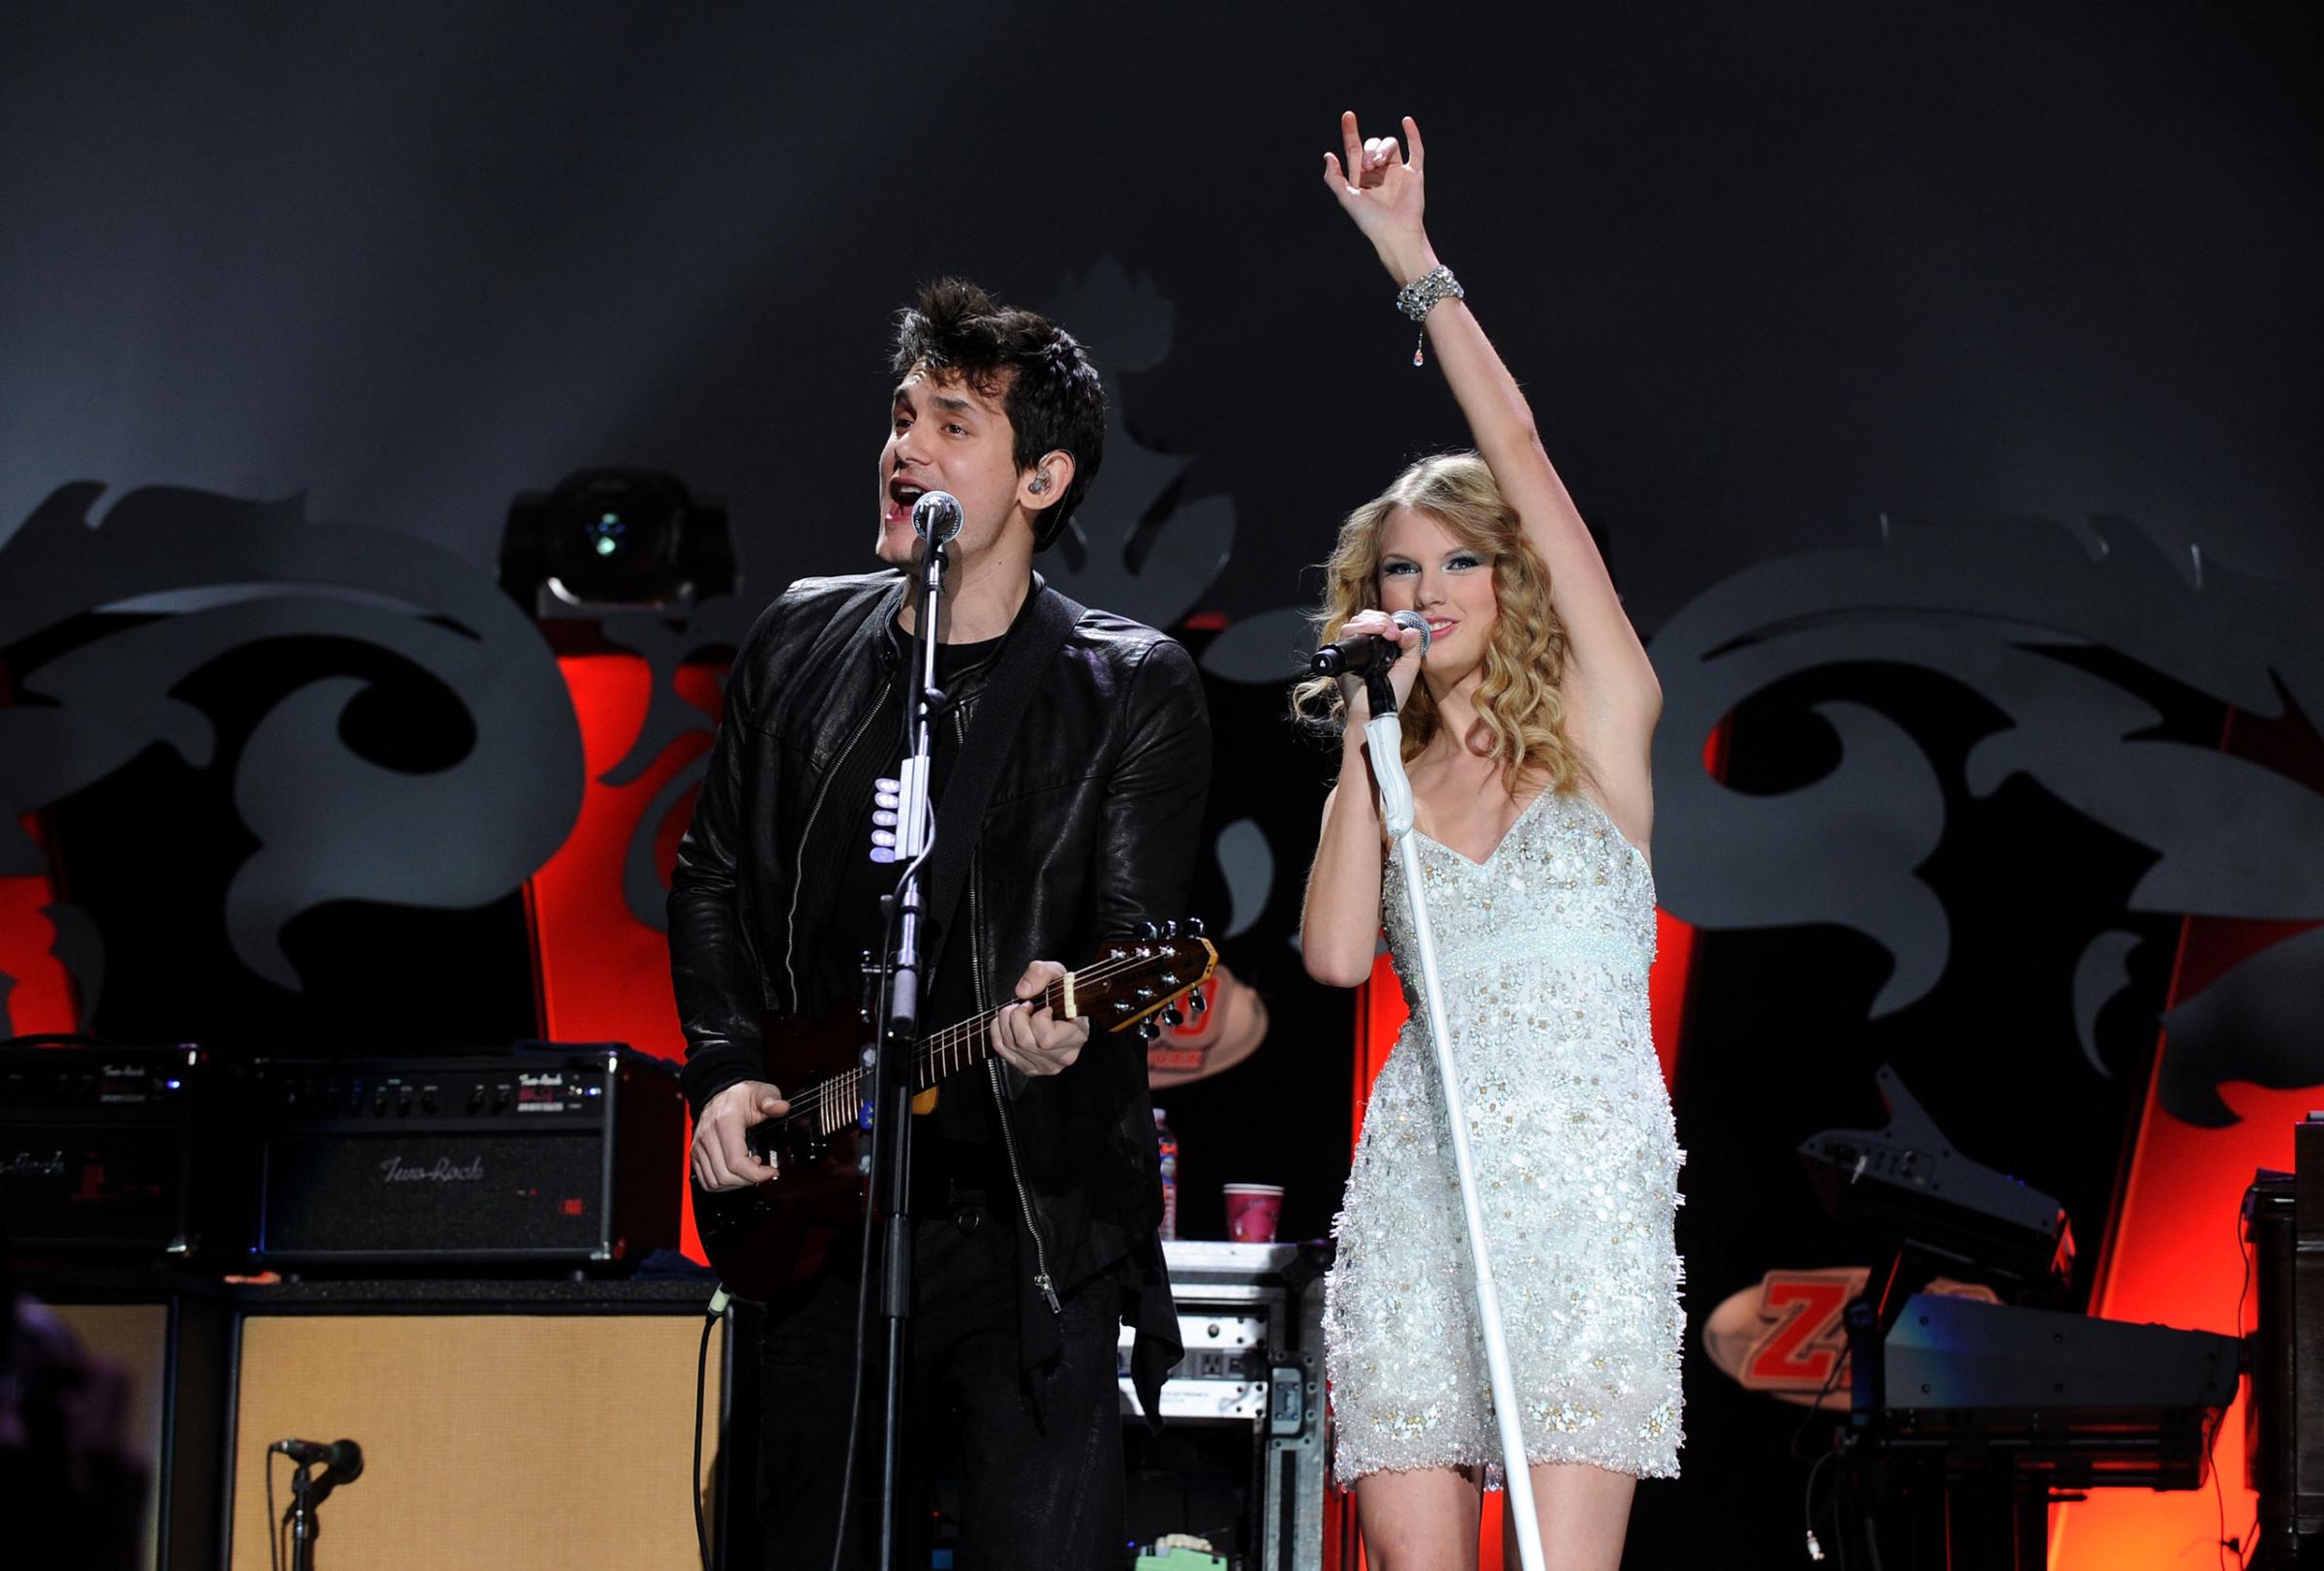 John Mayer and Taylor Swift perform onstage during Z100's Jingle Ball 2009 presented by H&amp;M at Madison Square Garden on December 11, 2009 in New York City. (Photo by Theo Wargo/WireImage)